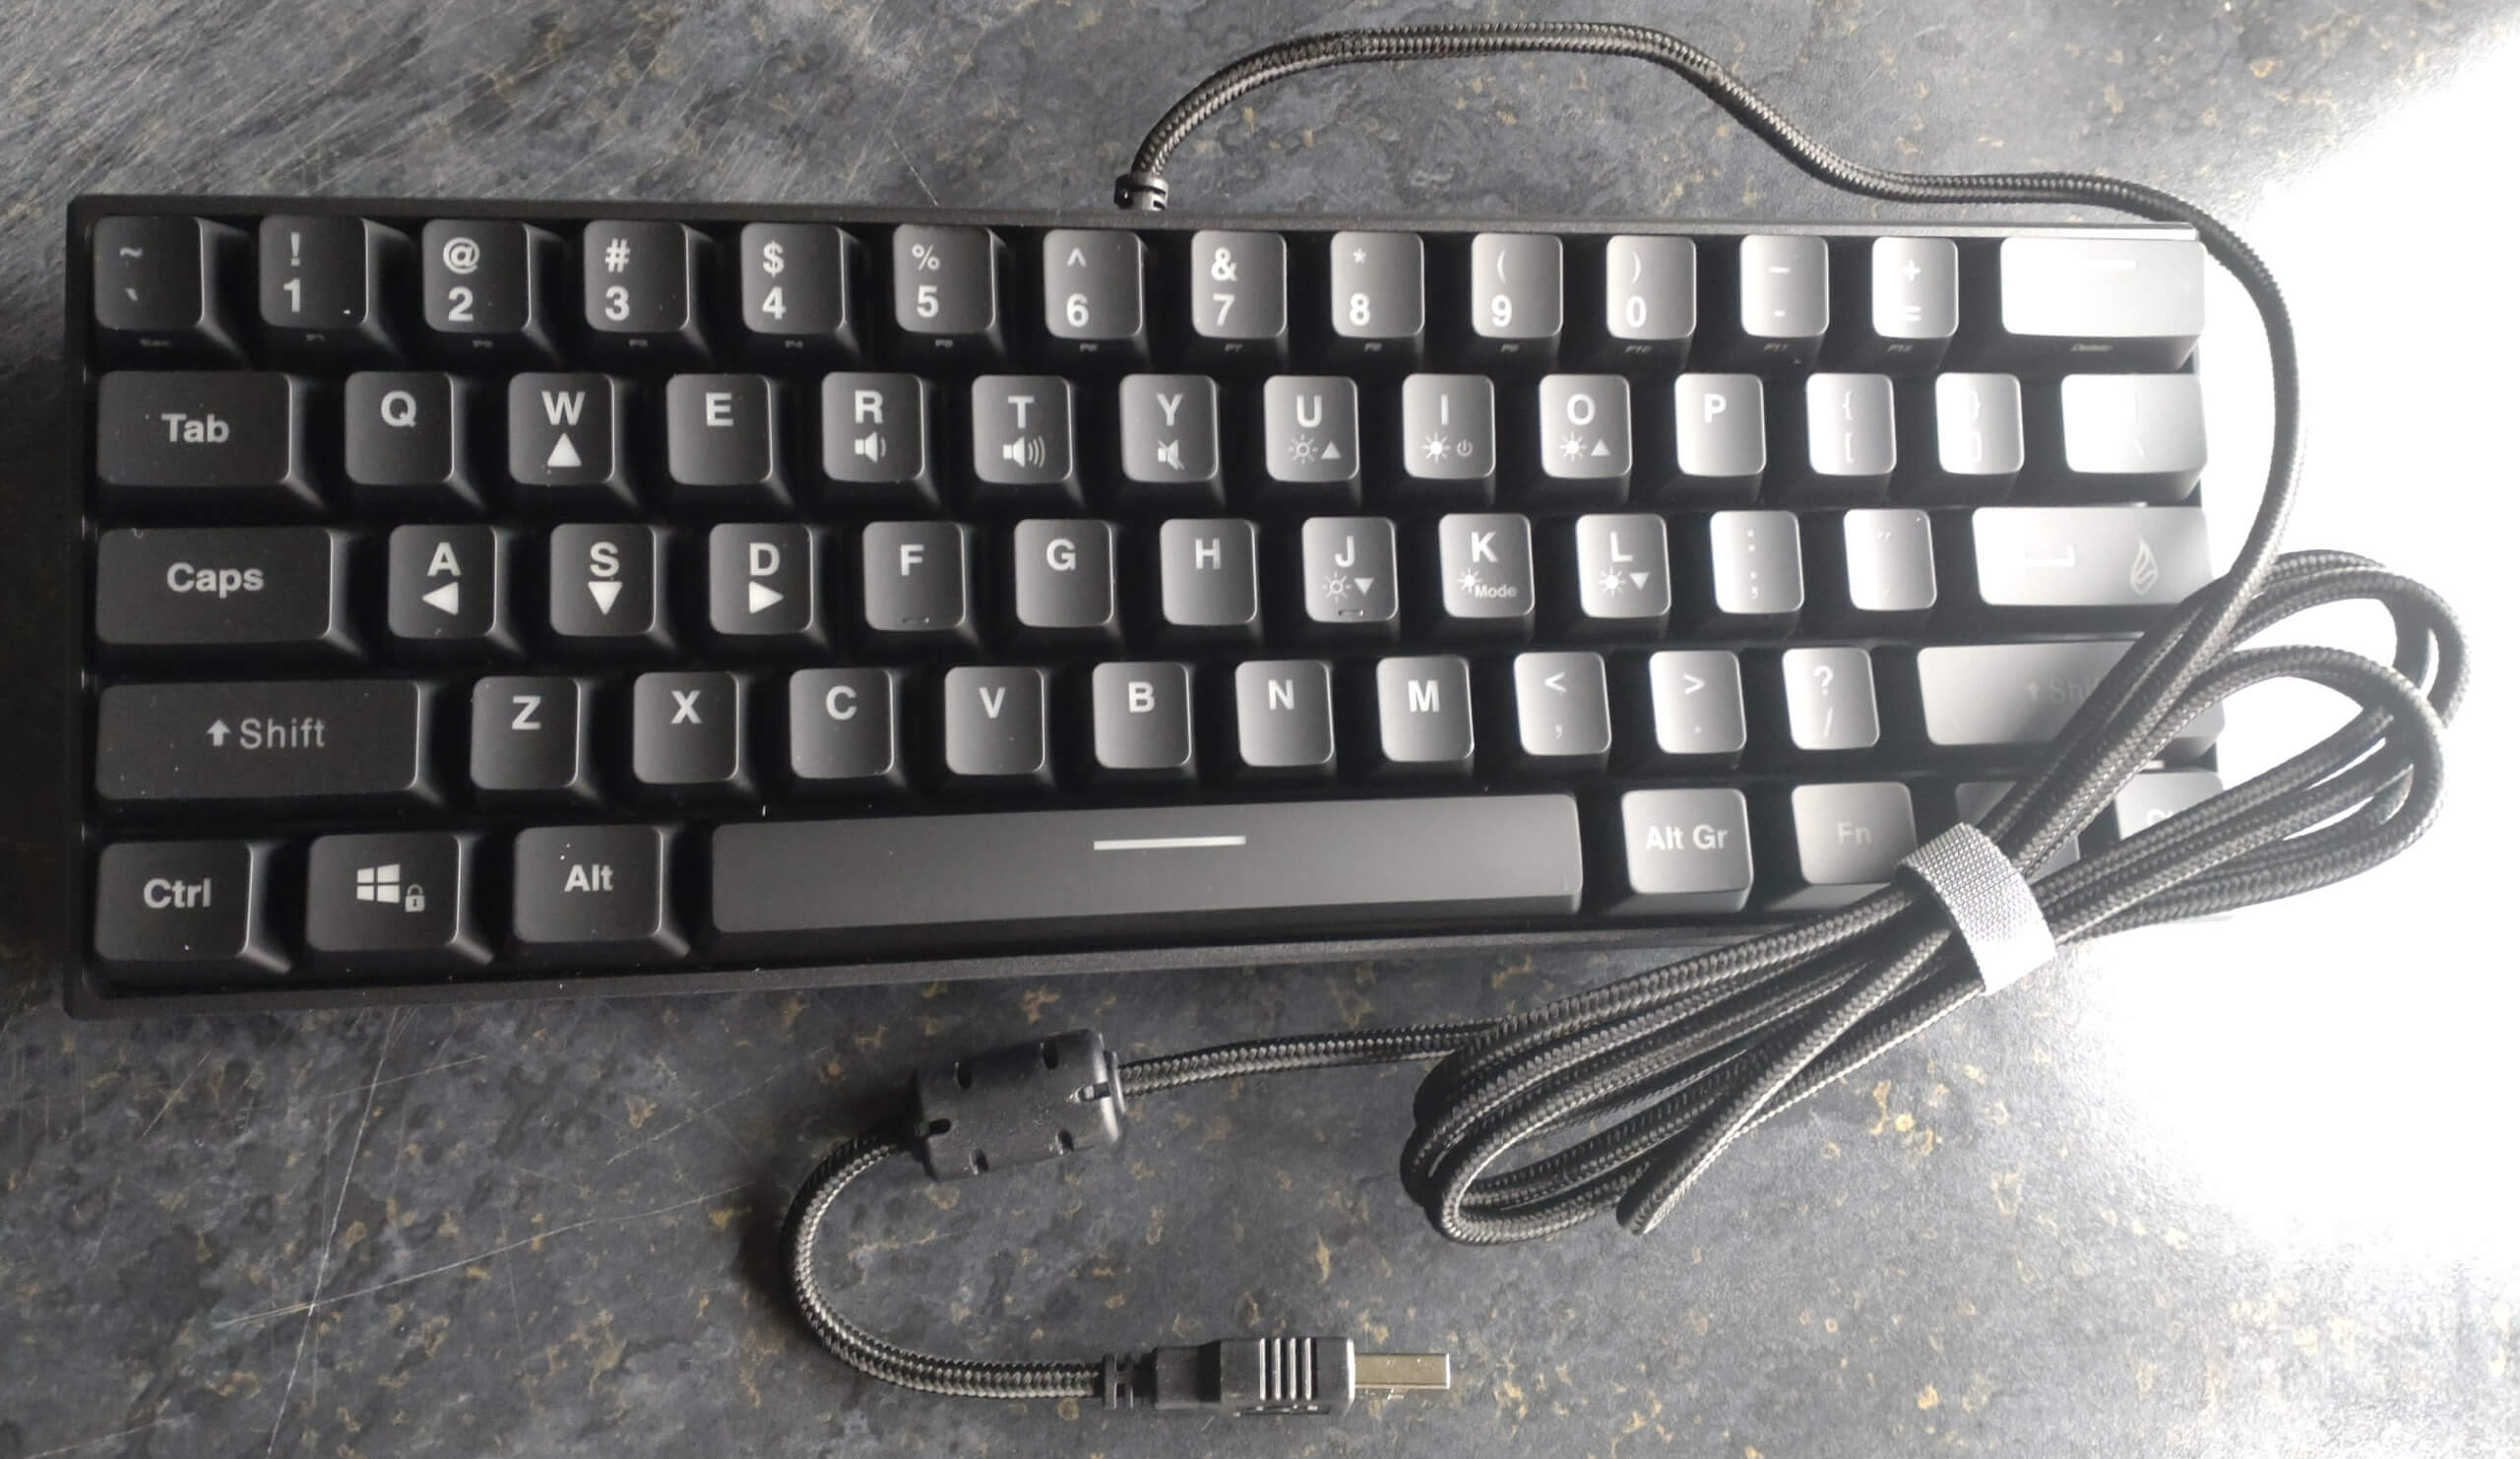 The Surefire Kingpin M1 Mechanical Keyboard with its tied USB cable beside it.